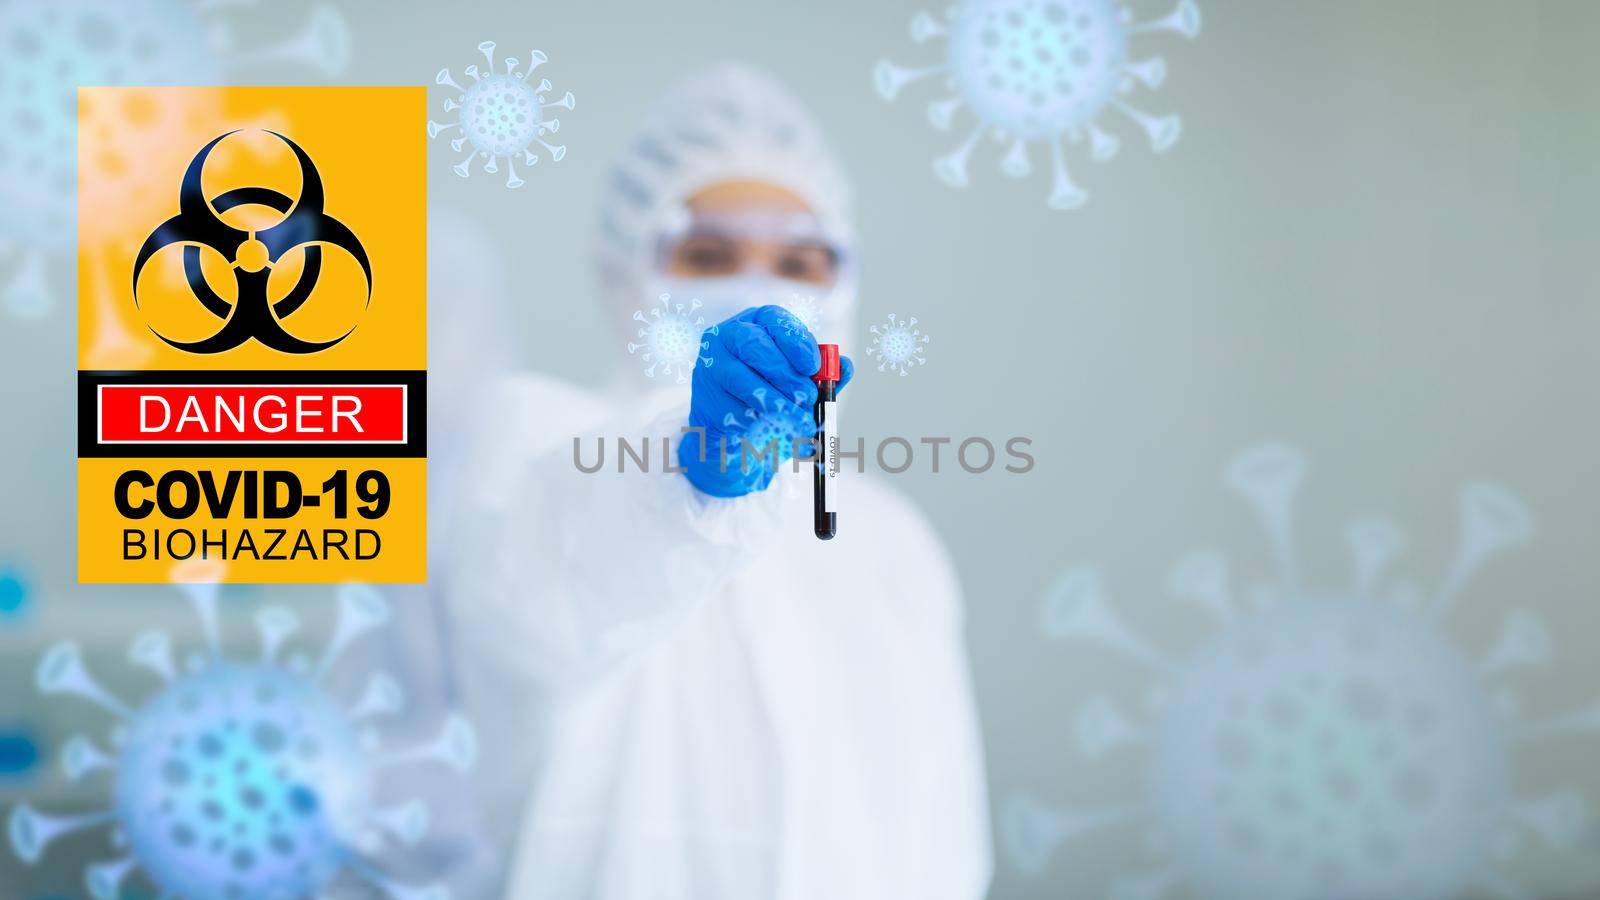 Scientists in the Biohazard protective suit are analyzing the blood sample of Covid-19 in the test tube To find a vaccine, coronavirus covid 19 vaccine research